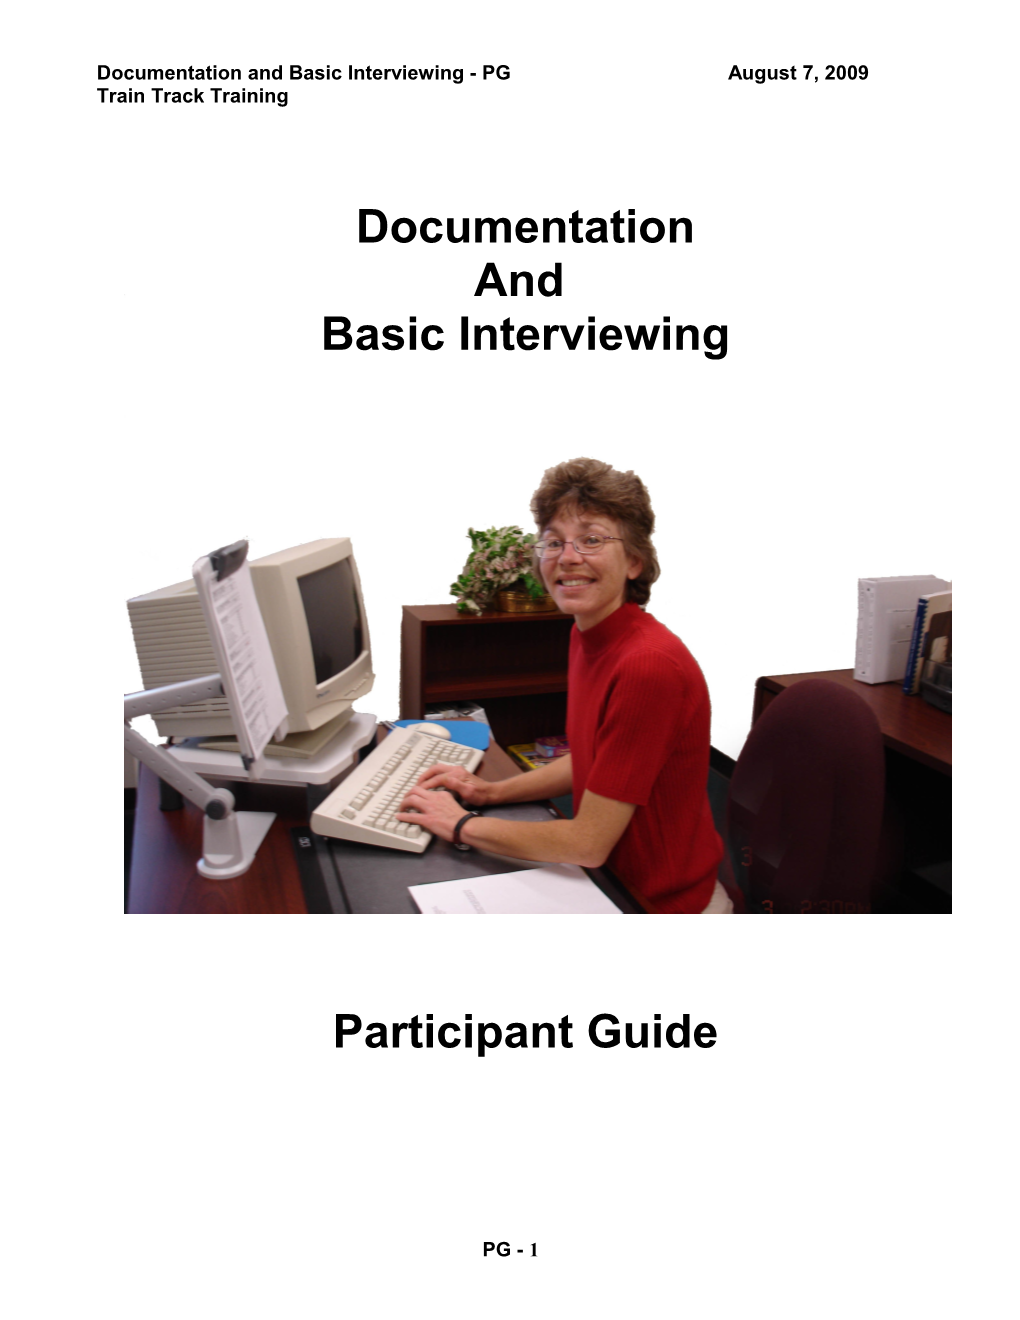 Documentation and Basic Interviewing - Pgaugust 7, 2009